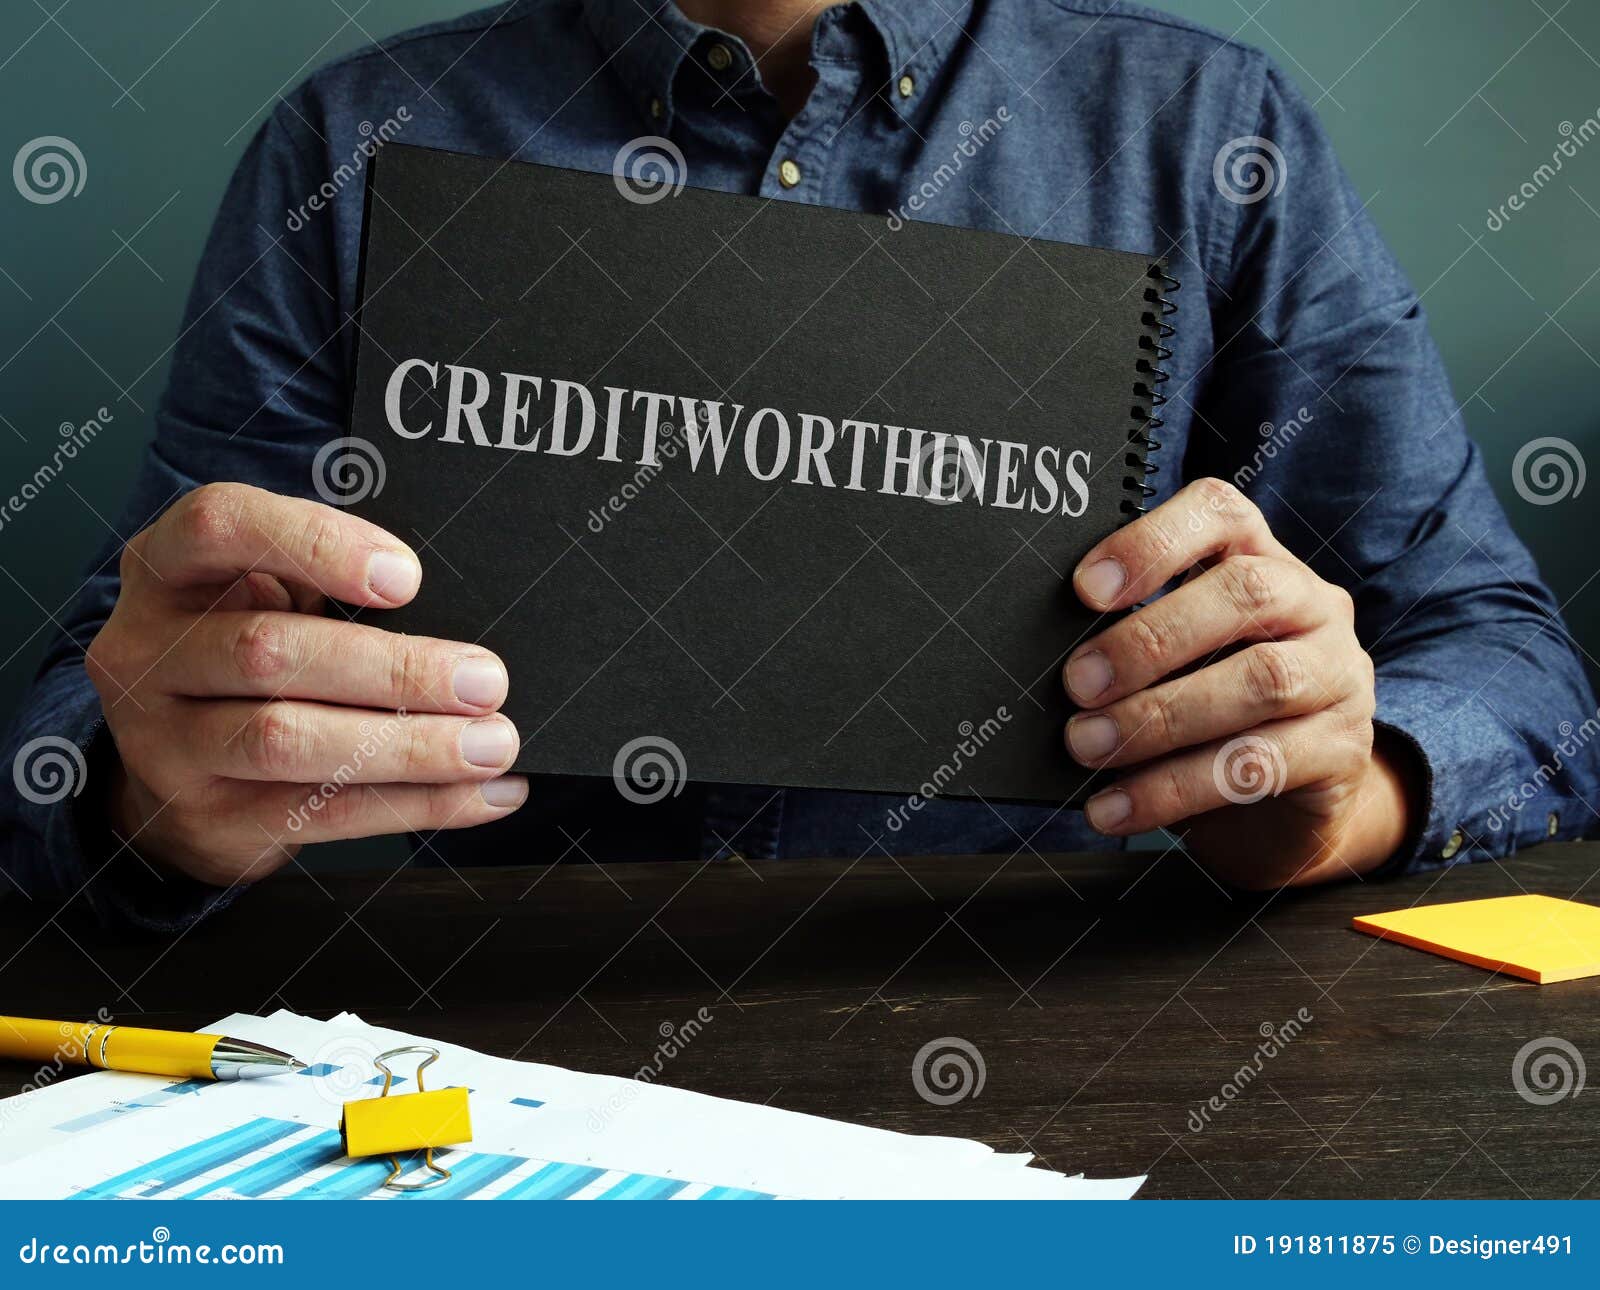 the man shows an sign creditworthiness on a black page.